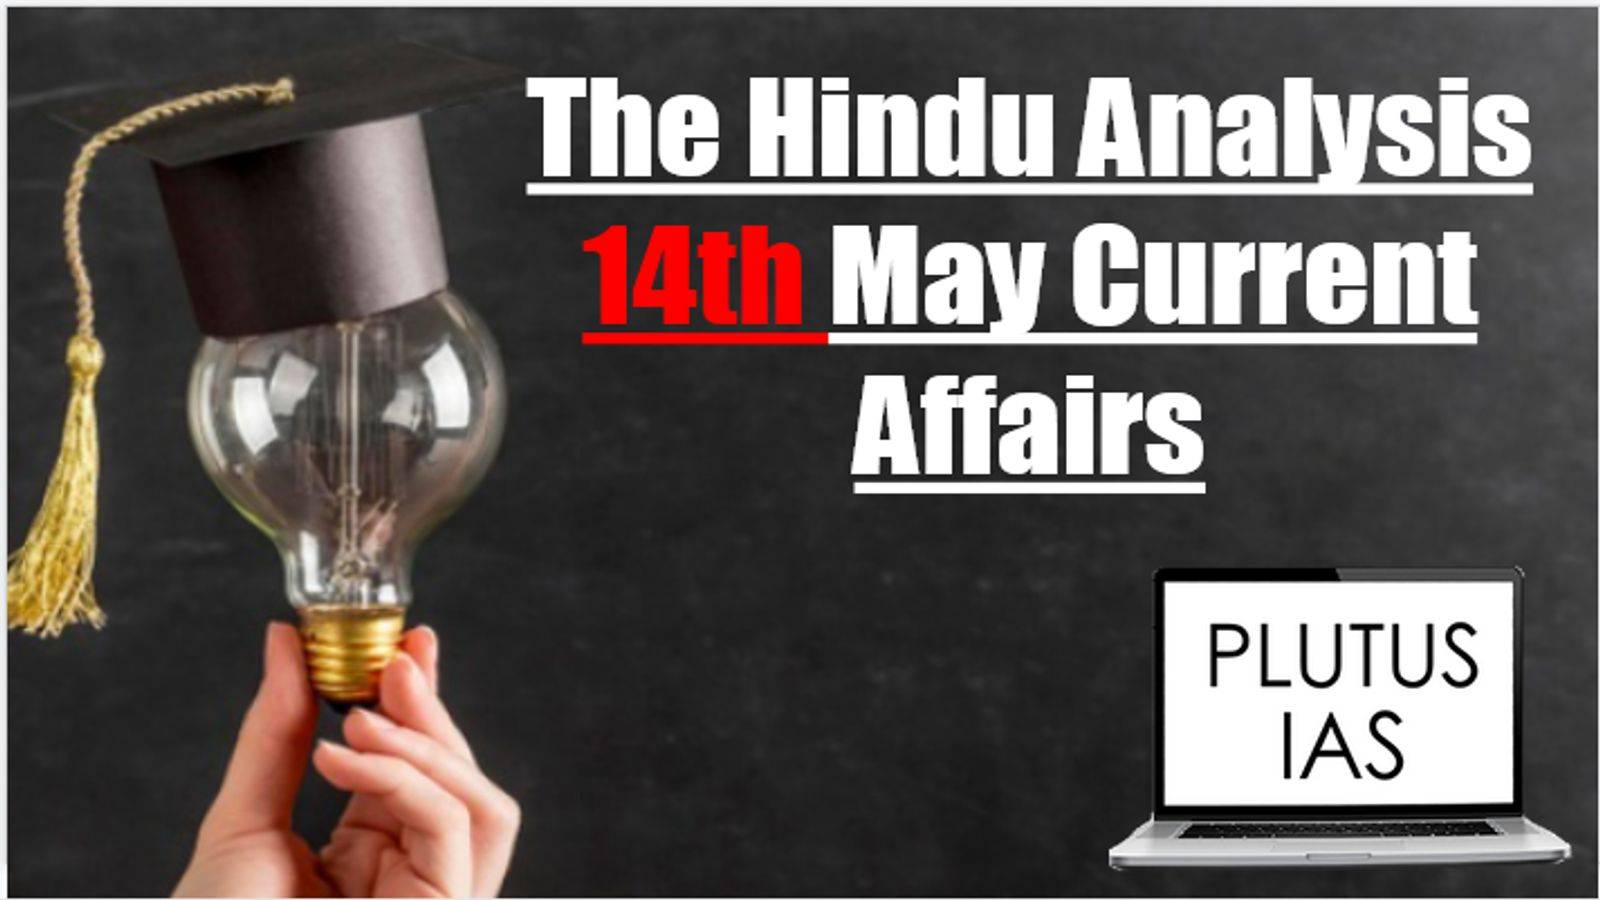 Today Current Affairs 14th May